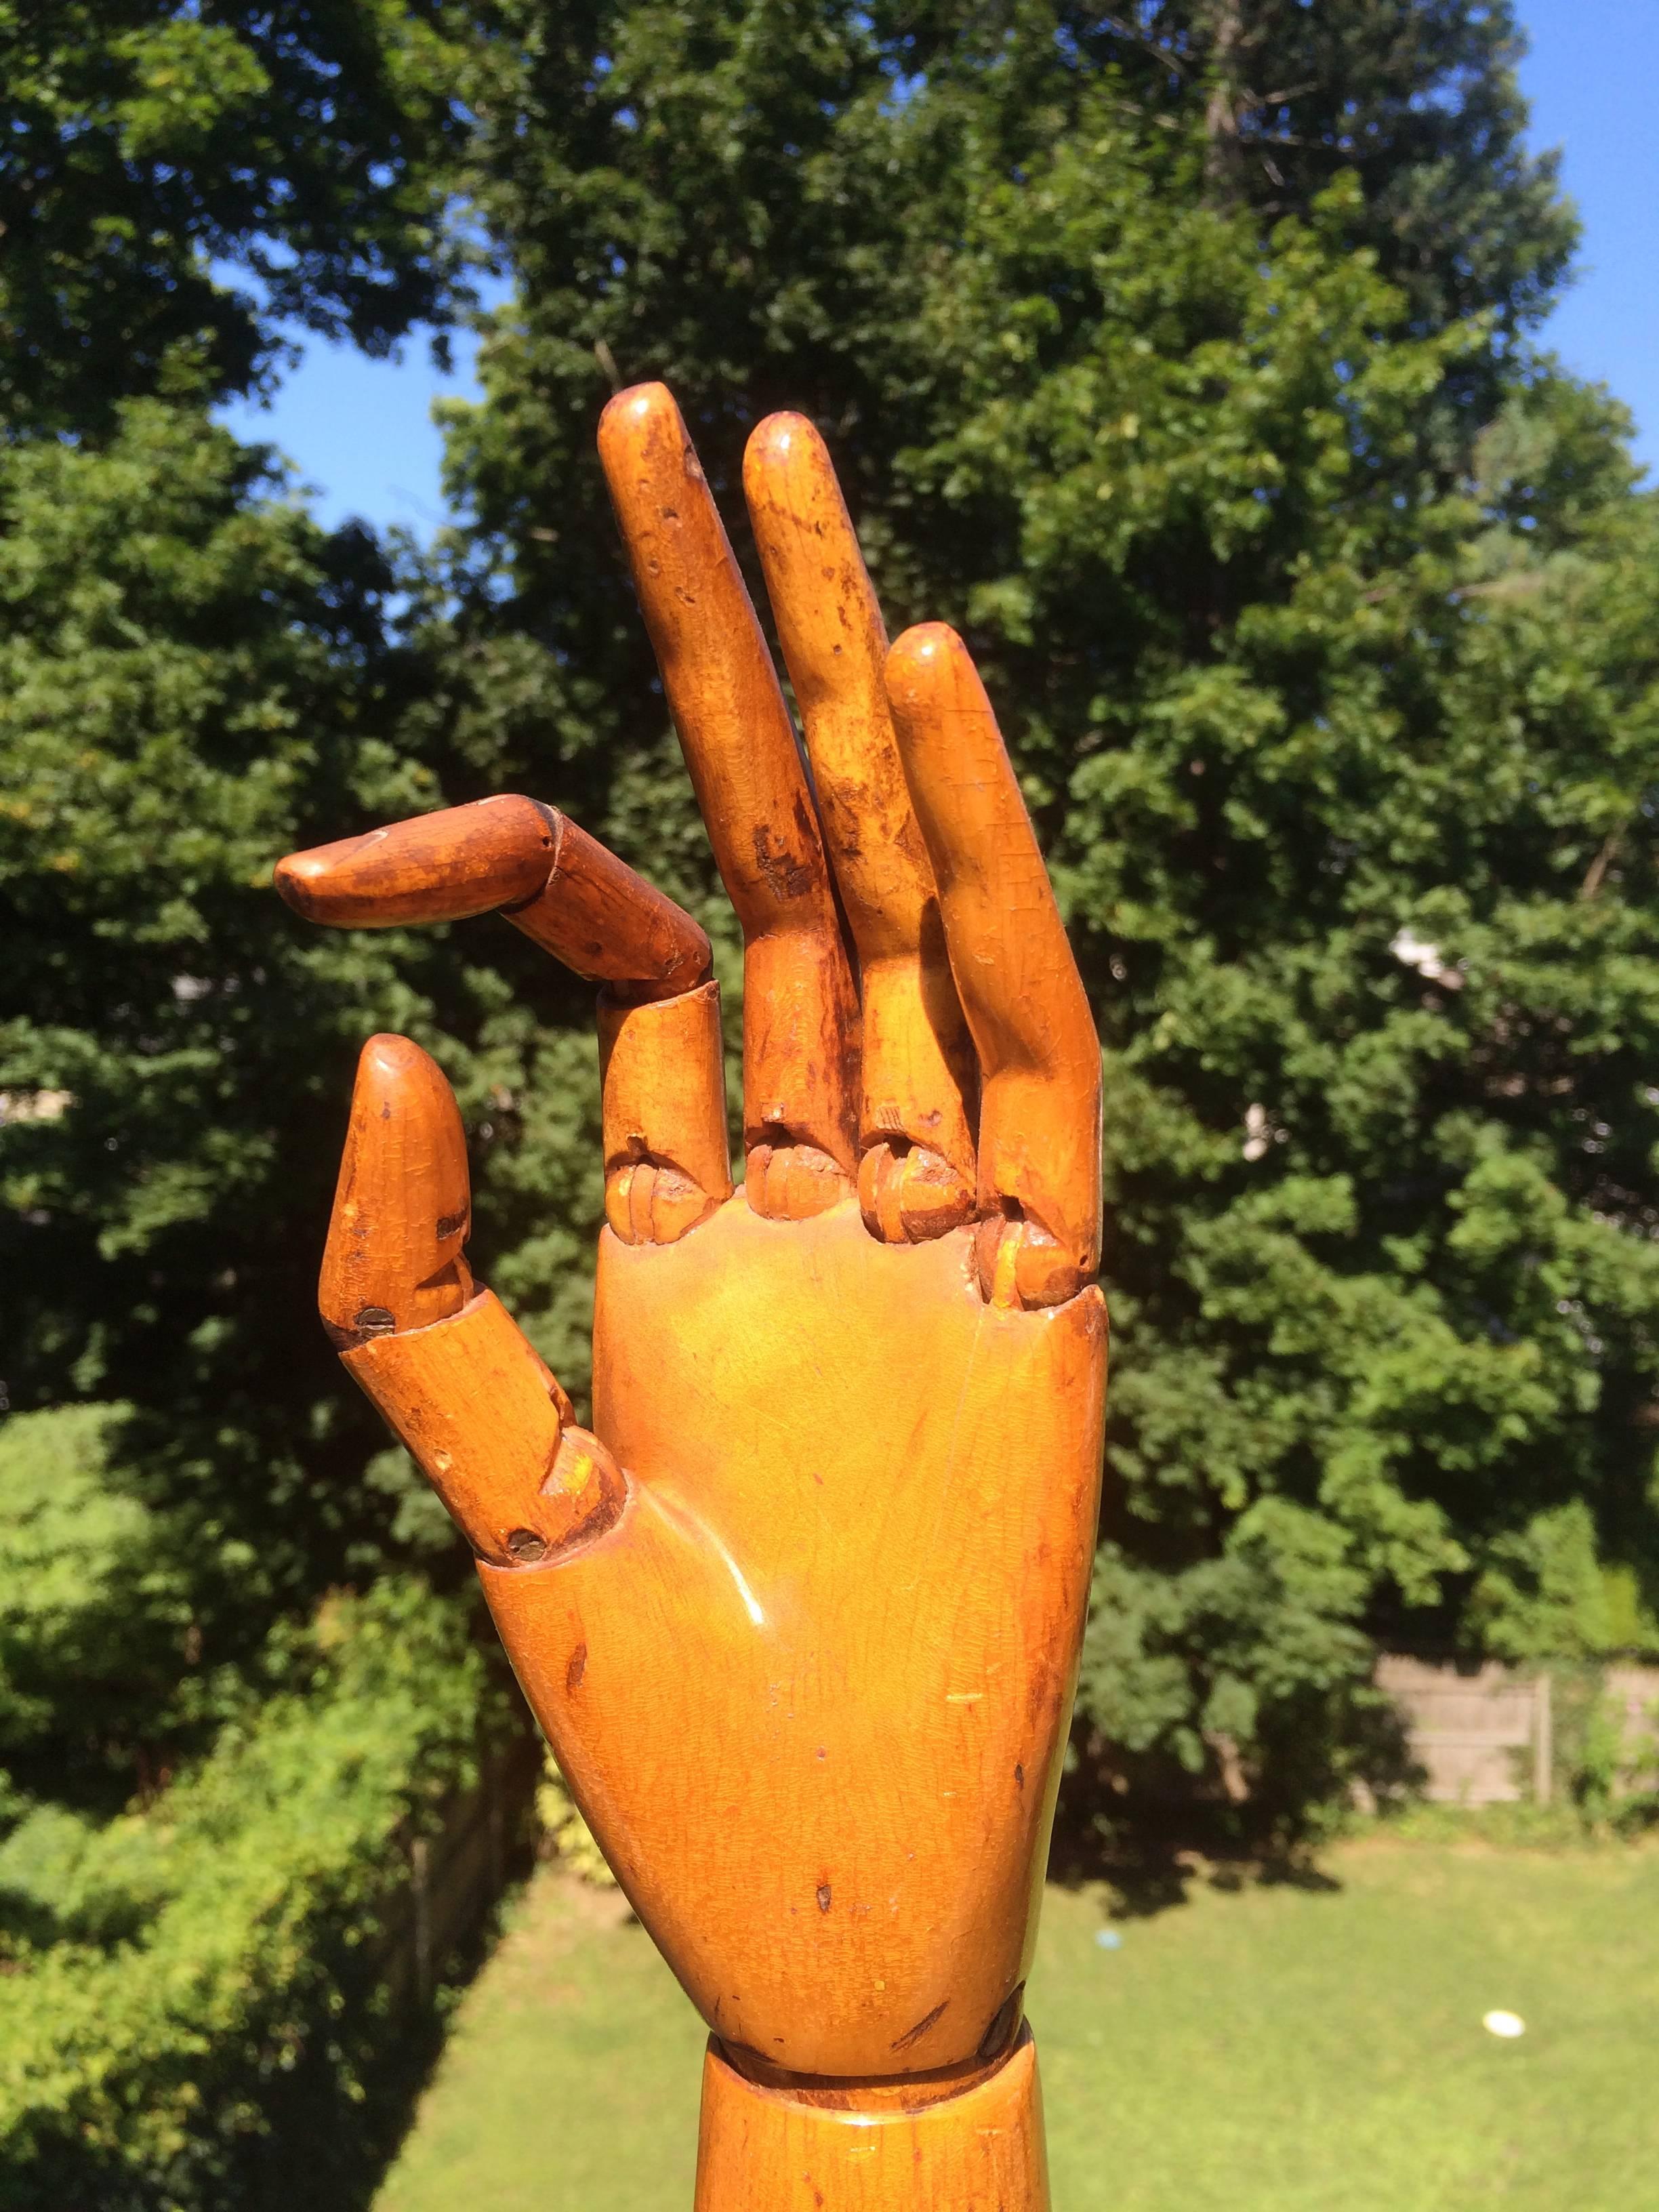 Best quality carved fruitwood lifesize articulated artists mannequin hand. The finely carved fingers eerily life-like, rich honey patina. French or Belgian with a impressed export mark on the bottom 'Made in Belgium.'